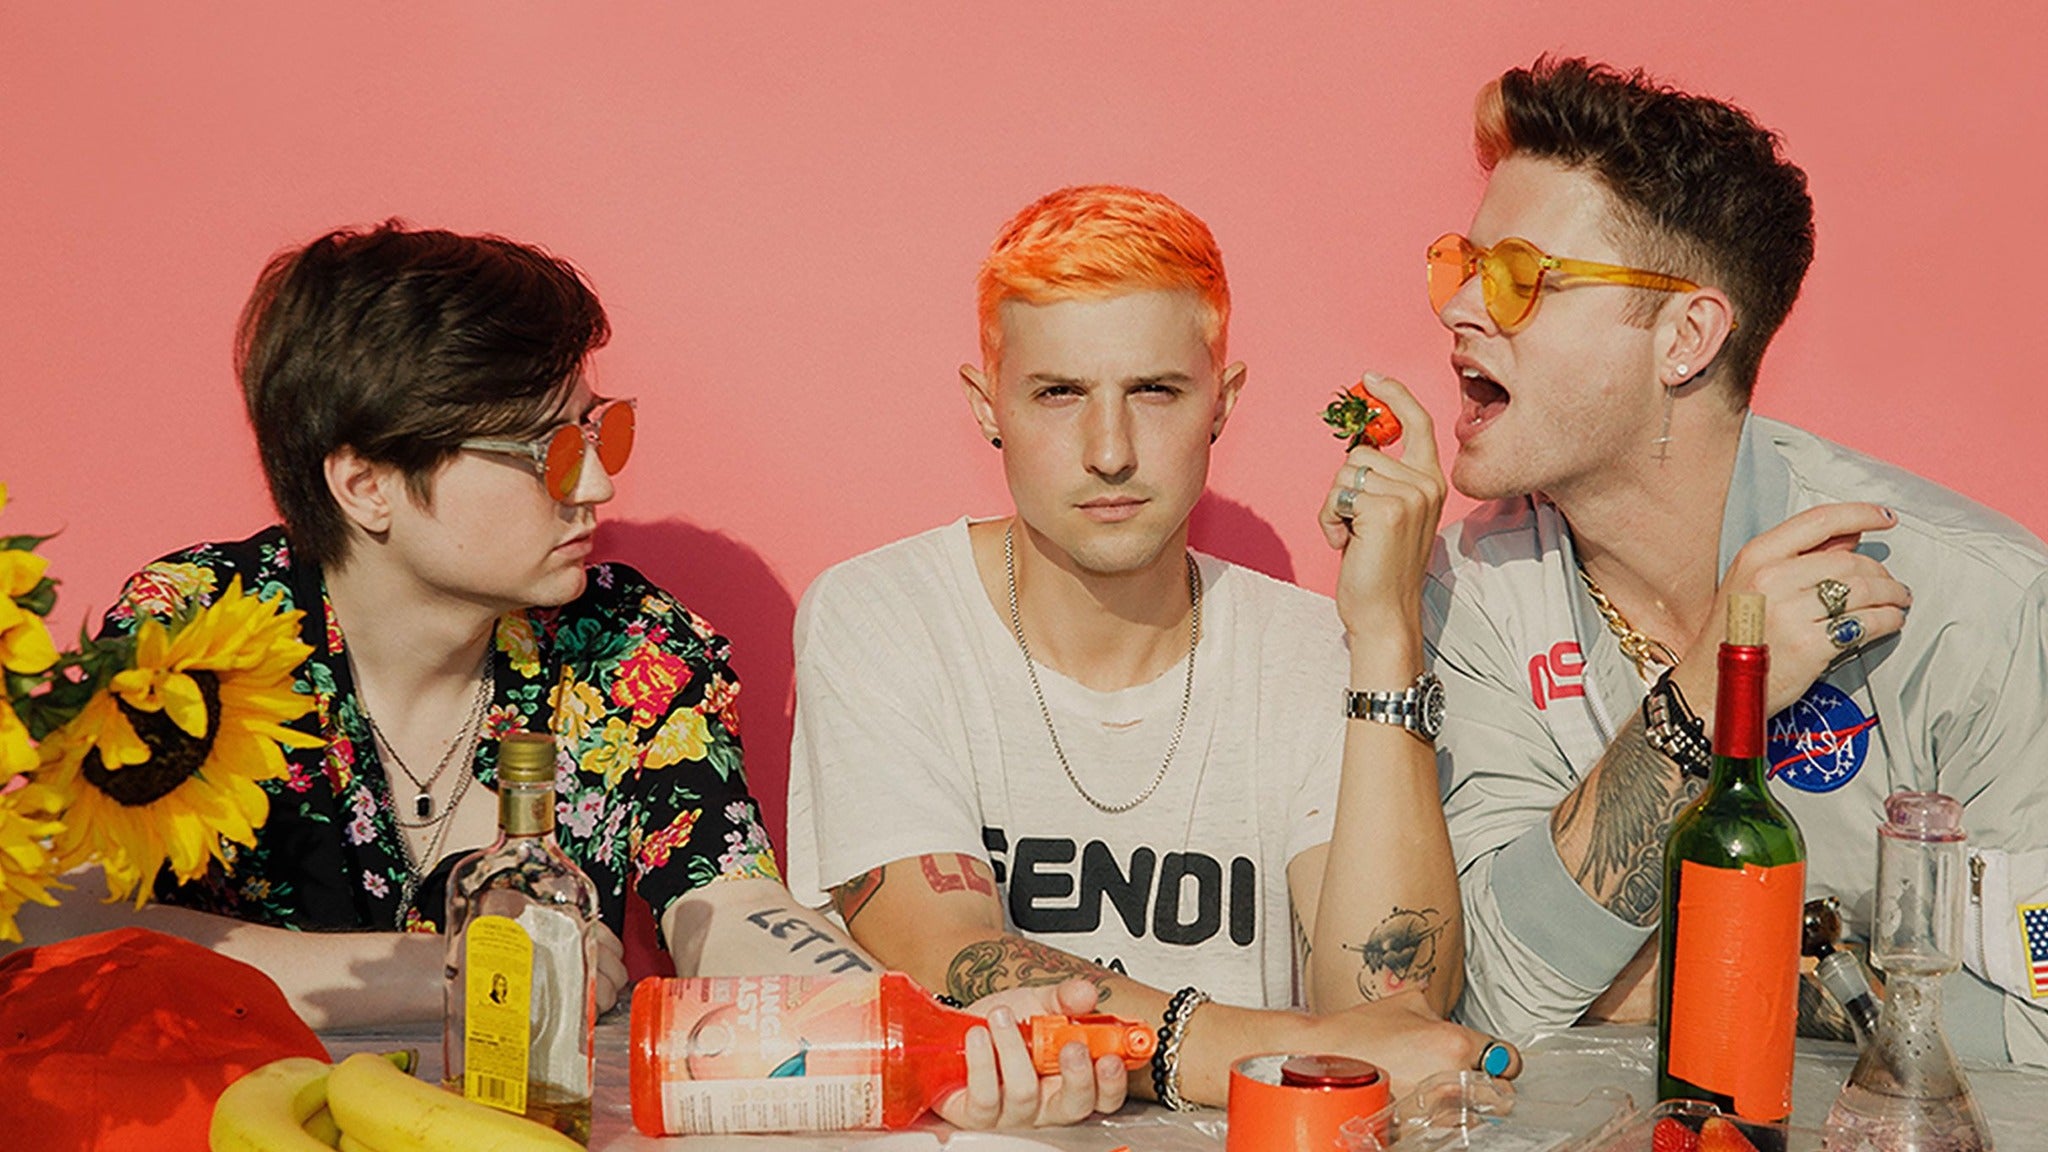 presale password for Hot Chelle Rae affordable tickets in Philadelphia